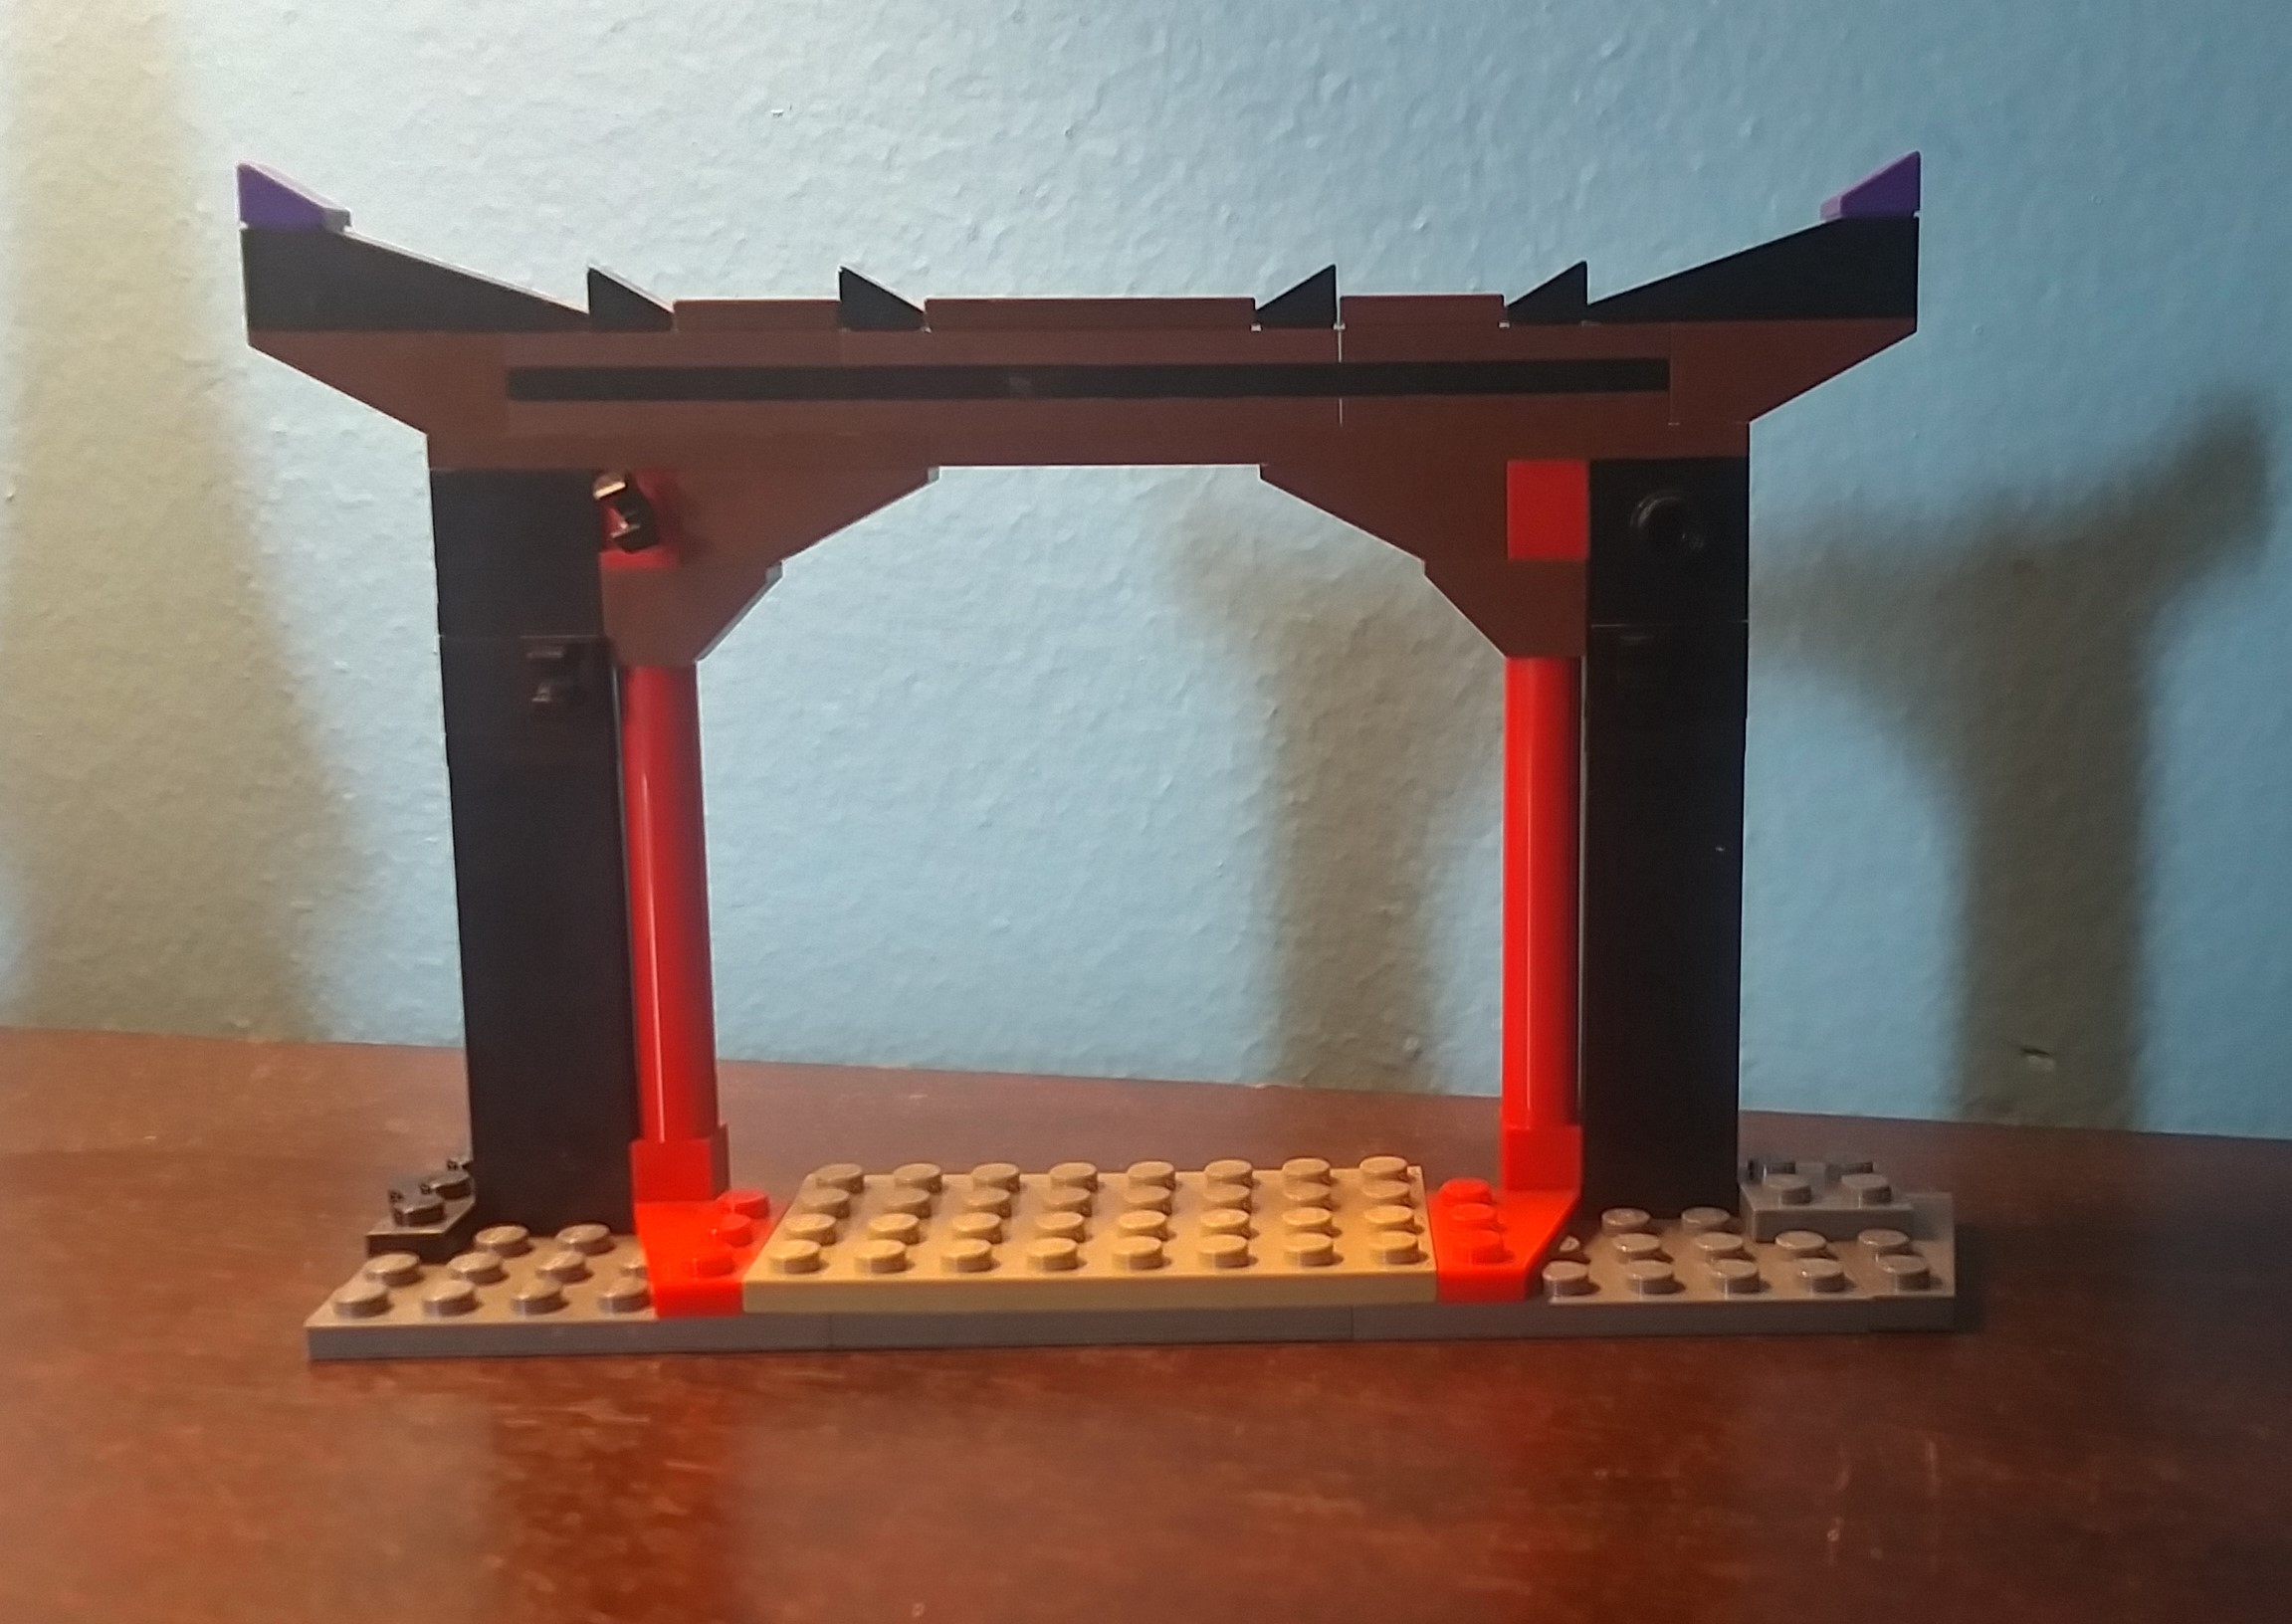 Ninjago Collectible/Artifact Display: Heroes p1 - Lego Creations - The TTV  Message Boards